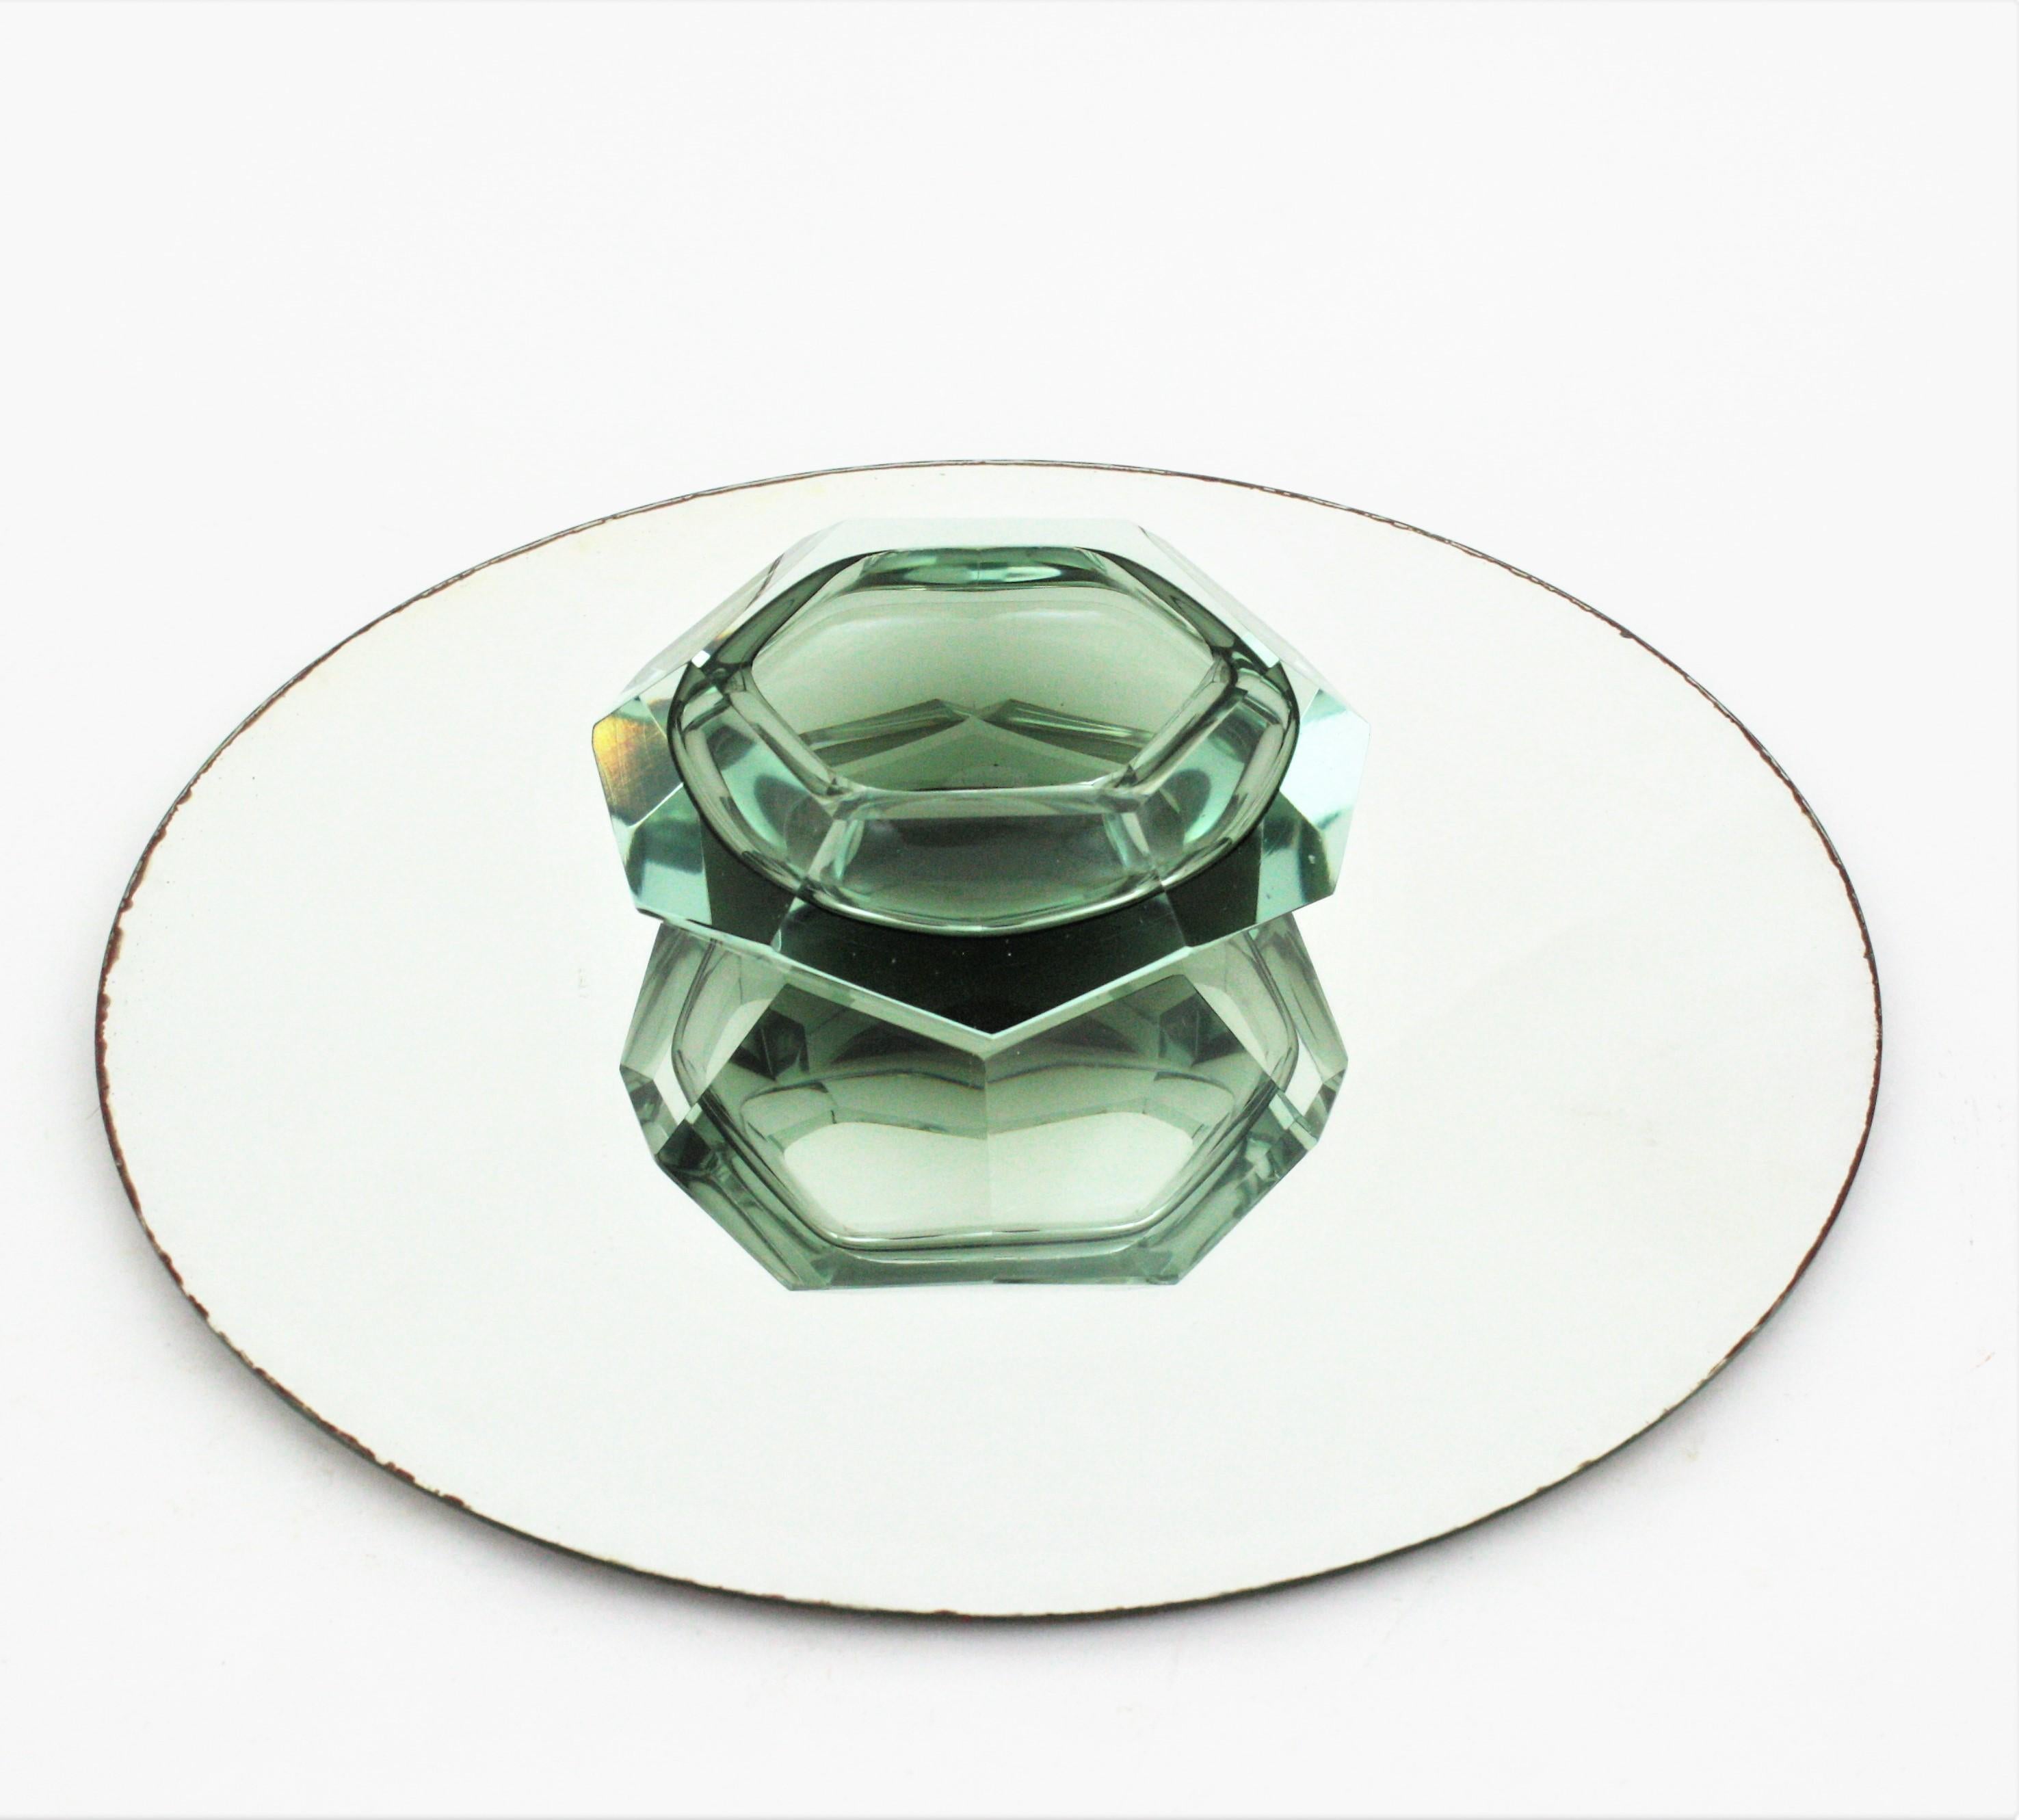 Glass Flavio Poli Murano Sommerso Smoked Grey Faceted Bowl